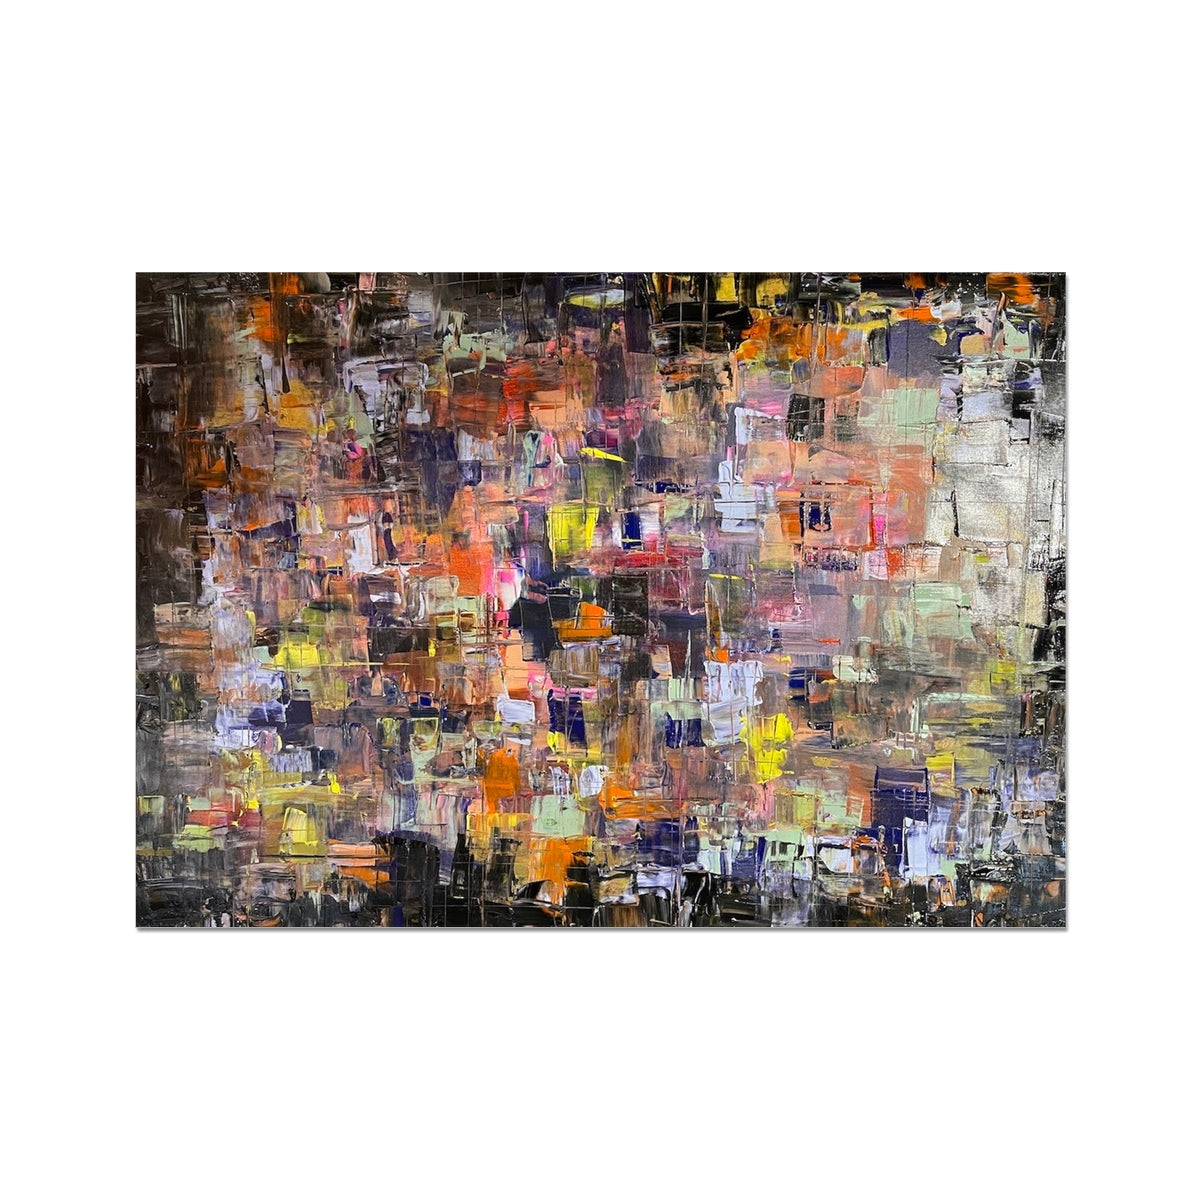 Never Enough Abstract Painting | Fine Art Prints From Scotland-Unframed Prints-Abstract & Impressionistic Art Gallery-A2 Landscape-Paintings, Prints, Homeware, Art Gifts From Scotland By Scottish Artist Kevin Hunter